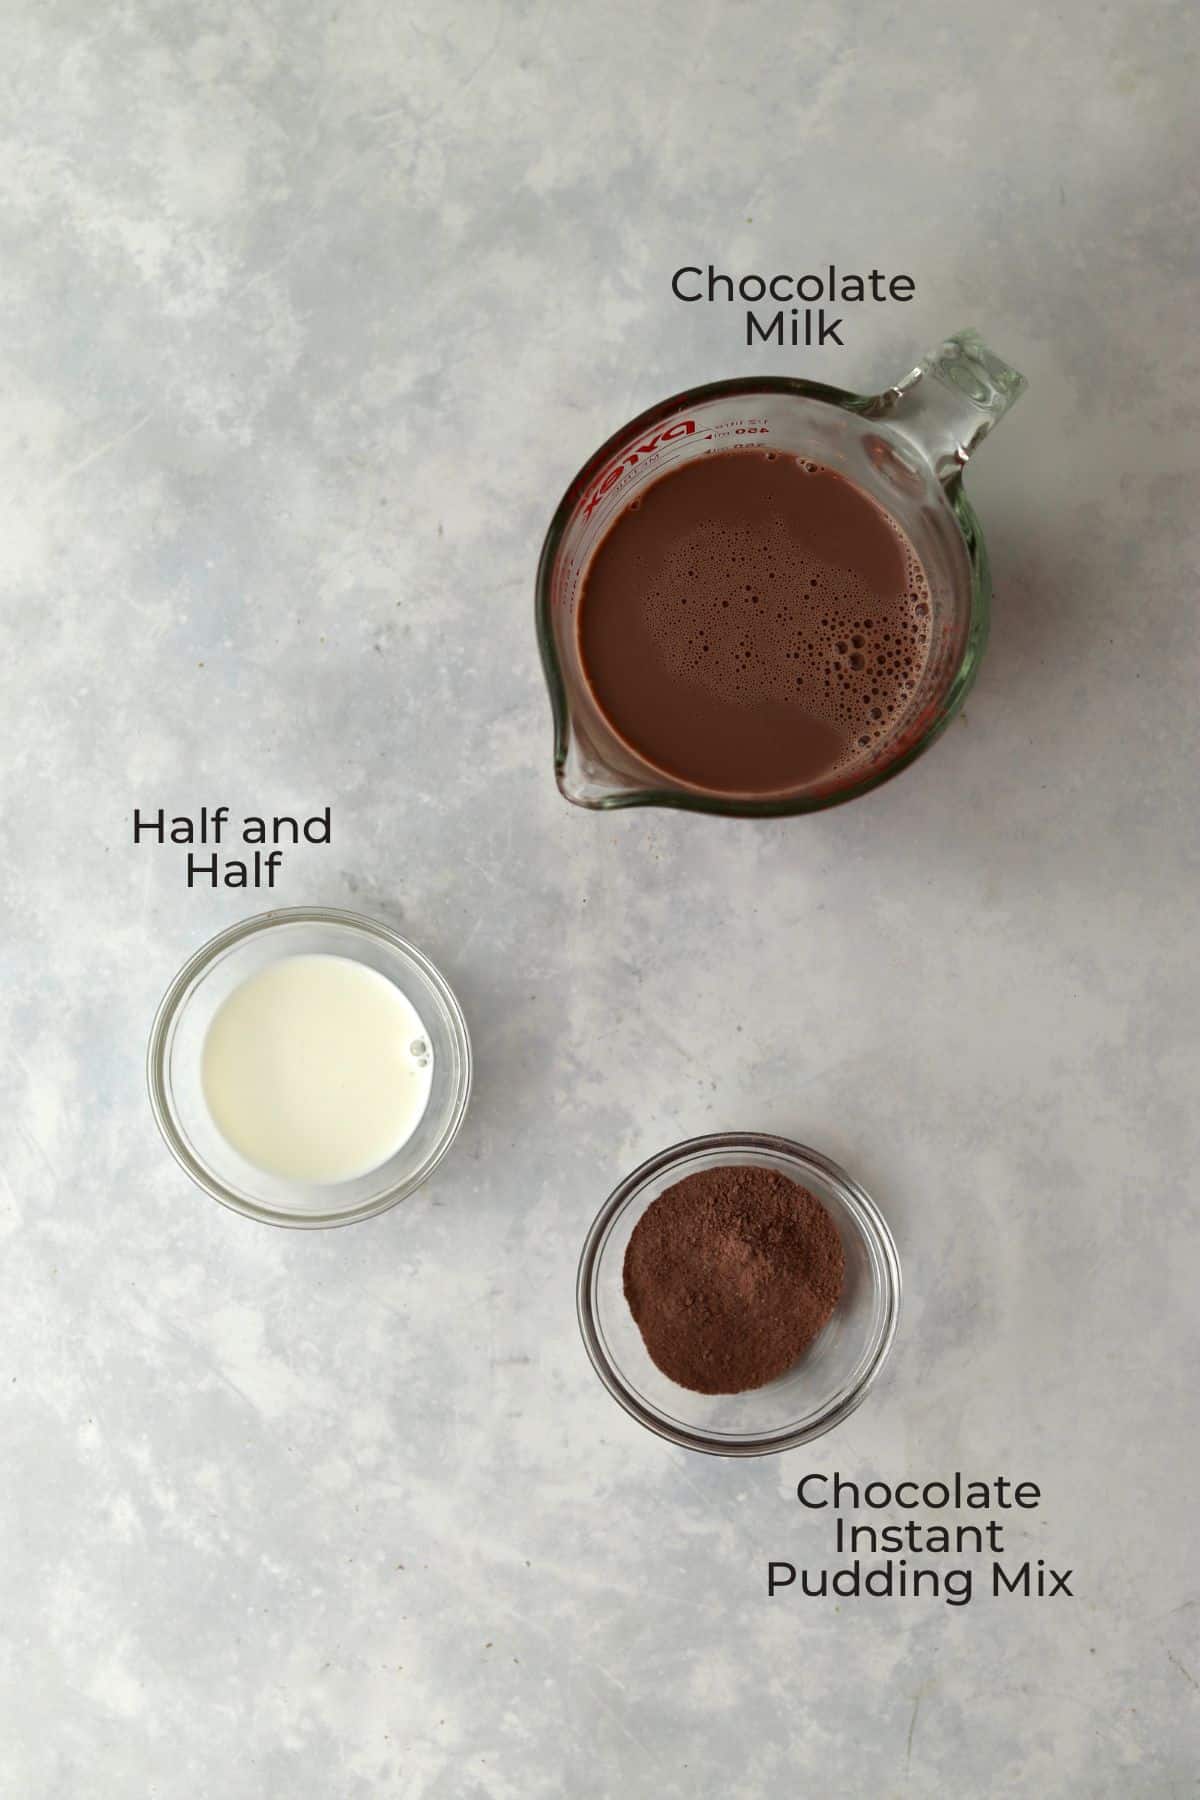 Chocolate milk, half and half, and instant pudding mix in glass prep bowls.